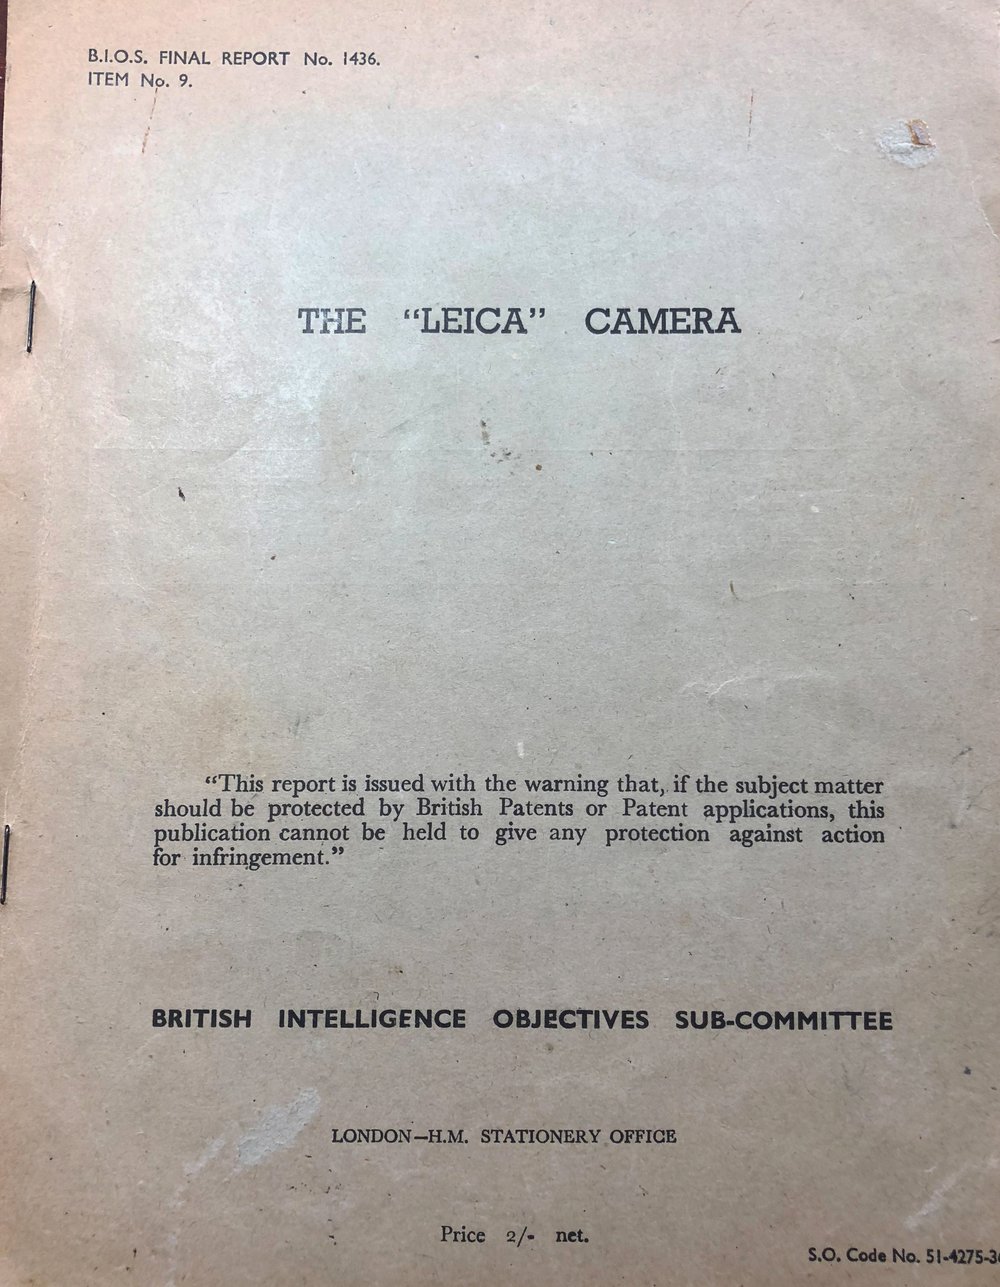   Rolled out on a Roneo duplicator and crudely stapled, the official intelligence report on E.Leitz provides a fascinating insight into the state of the Leica camera in 1946  